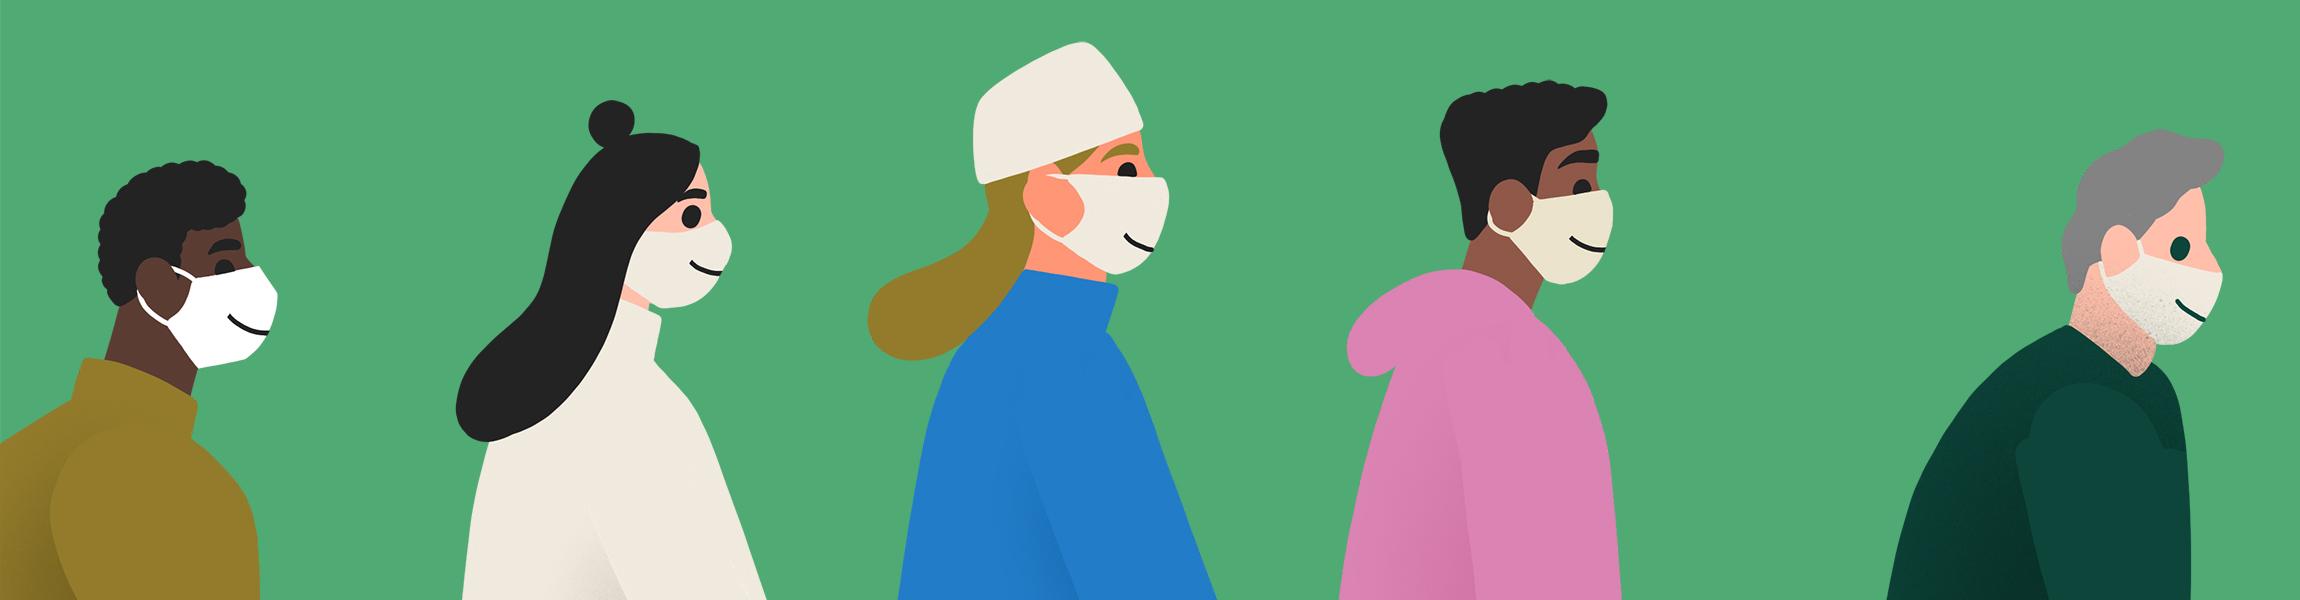 Illustration featuring a people of different races and ages standing in a line; they are all wearing facemasks with a small smile printed on them.